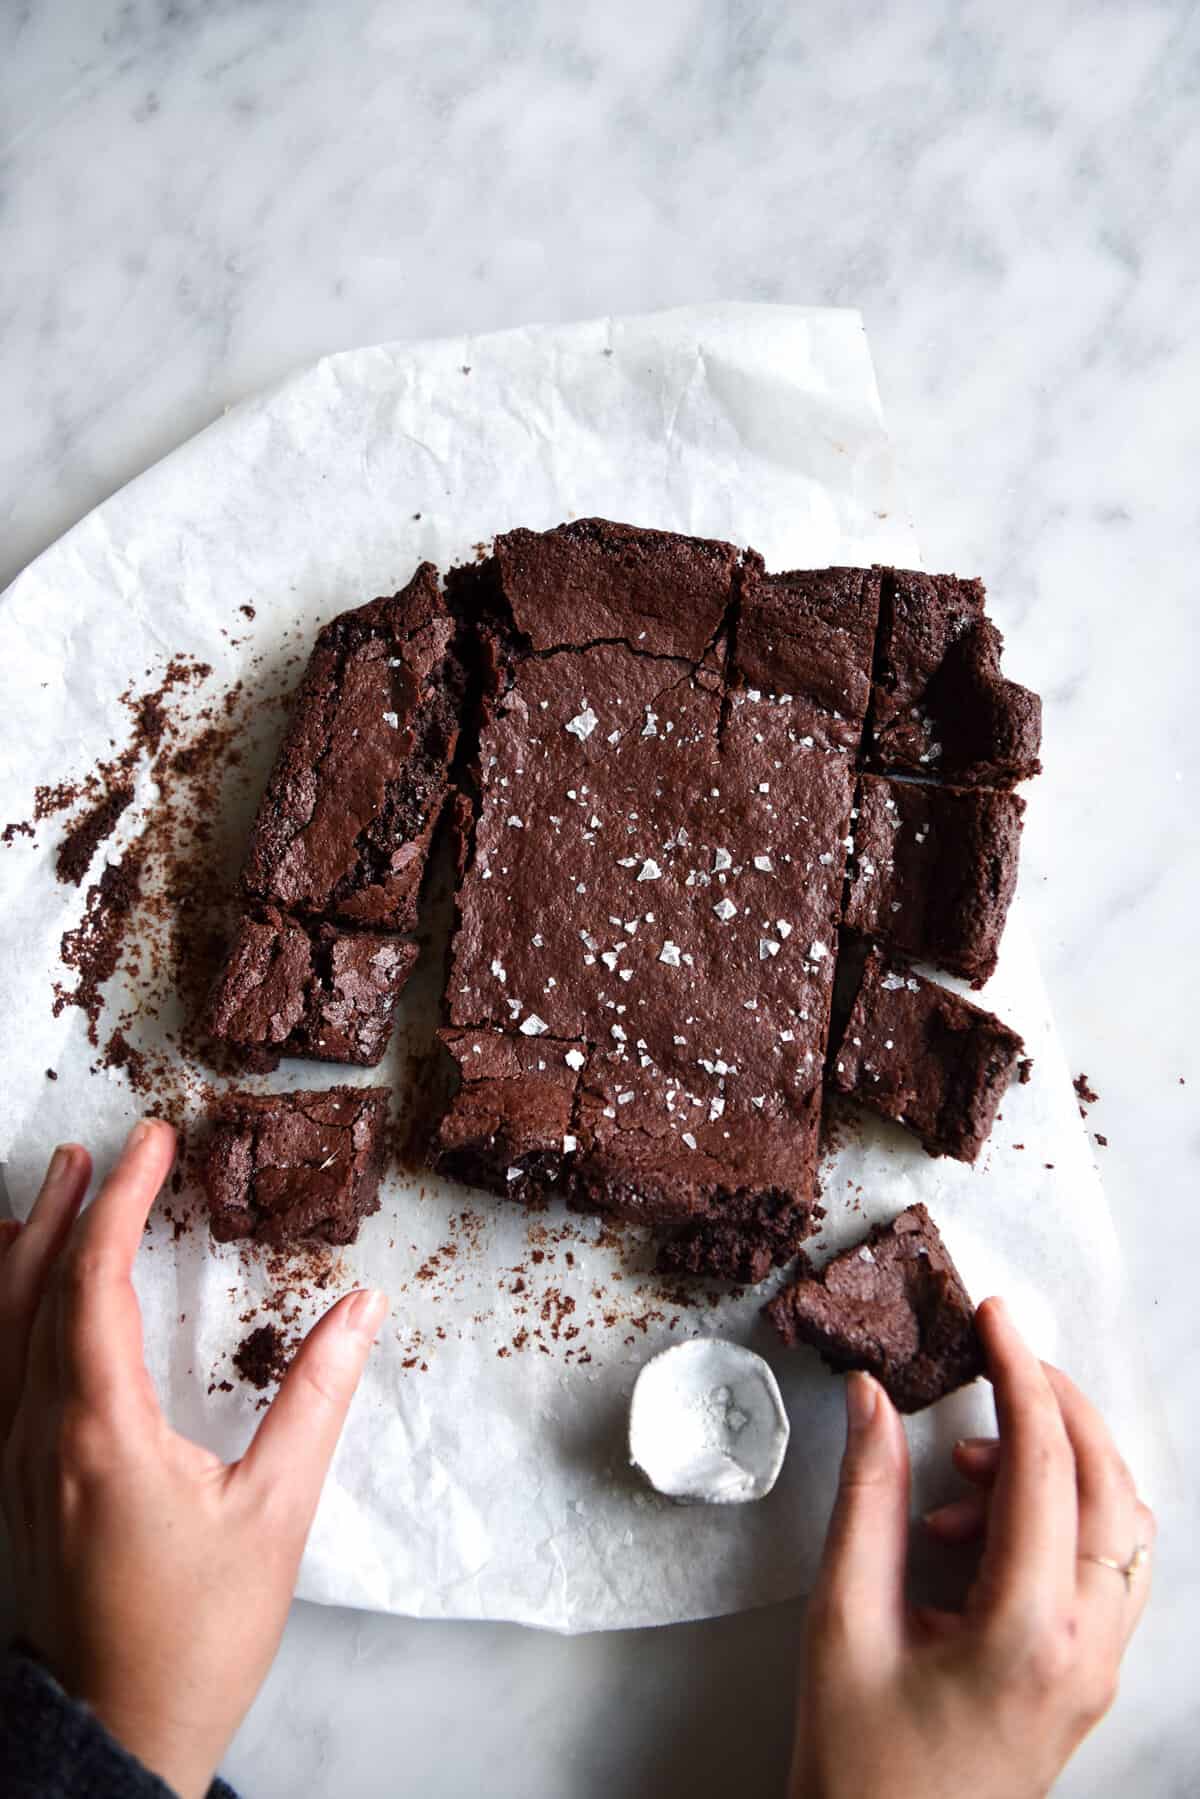 An image of a slab of gluten free vegan brownie atop a white marble table. The brownie is on a white sheet of baking paper and two hands extend from the bottom of the image to take pieces of the sliced brownie.